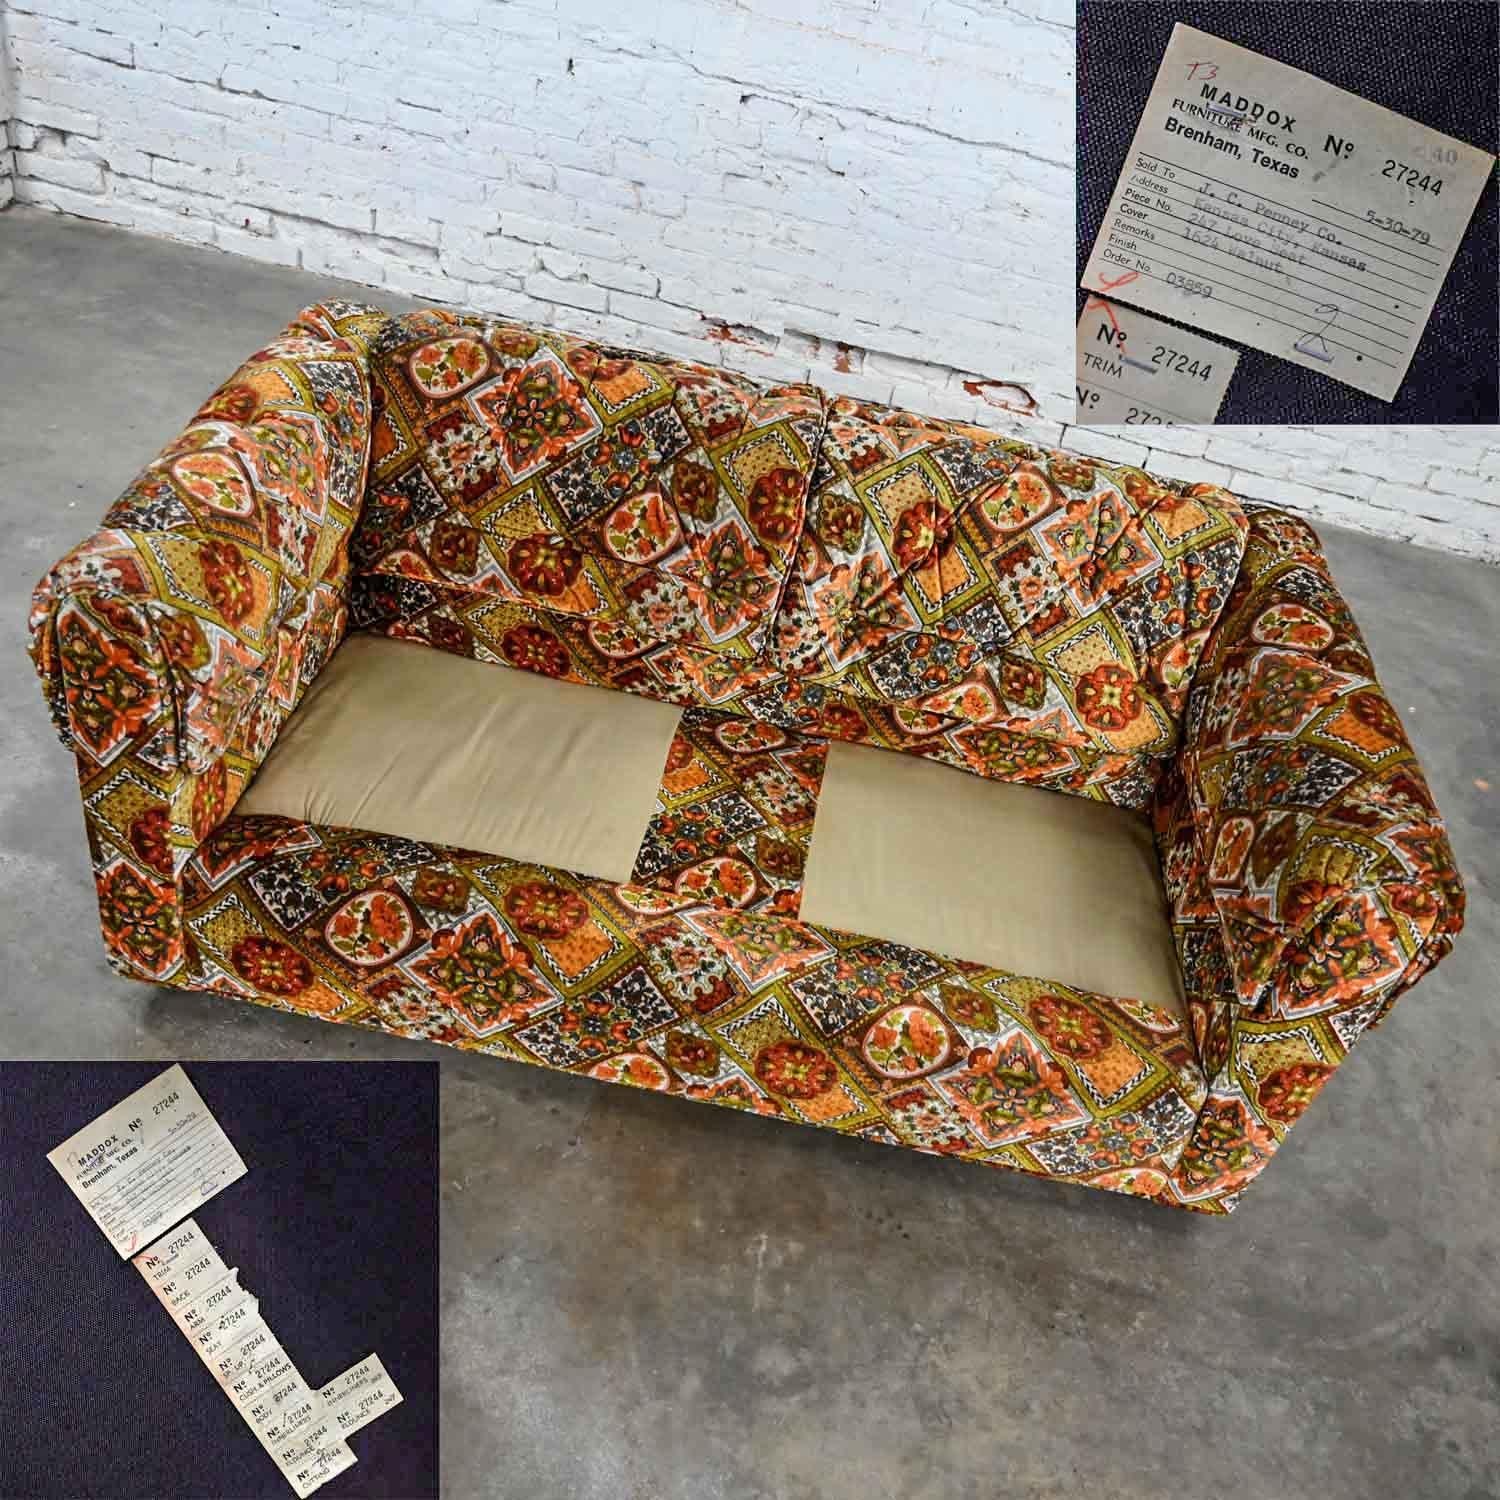 Orange Gold Geometric Floral Patchwork Modern Tuxedo Style Love Seat by Maddox  2